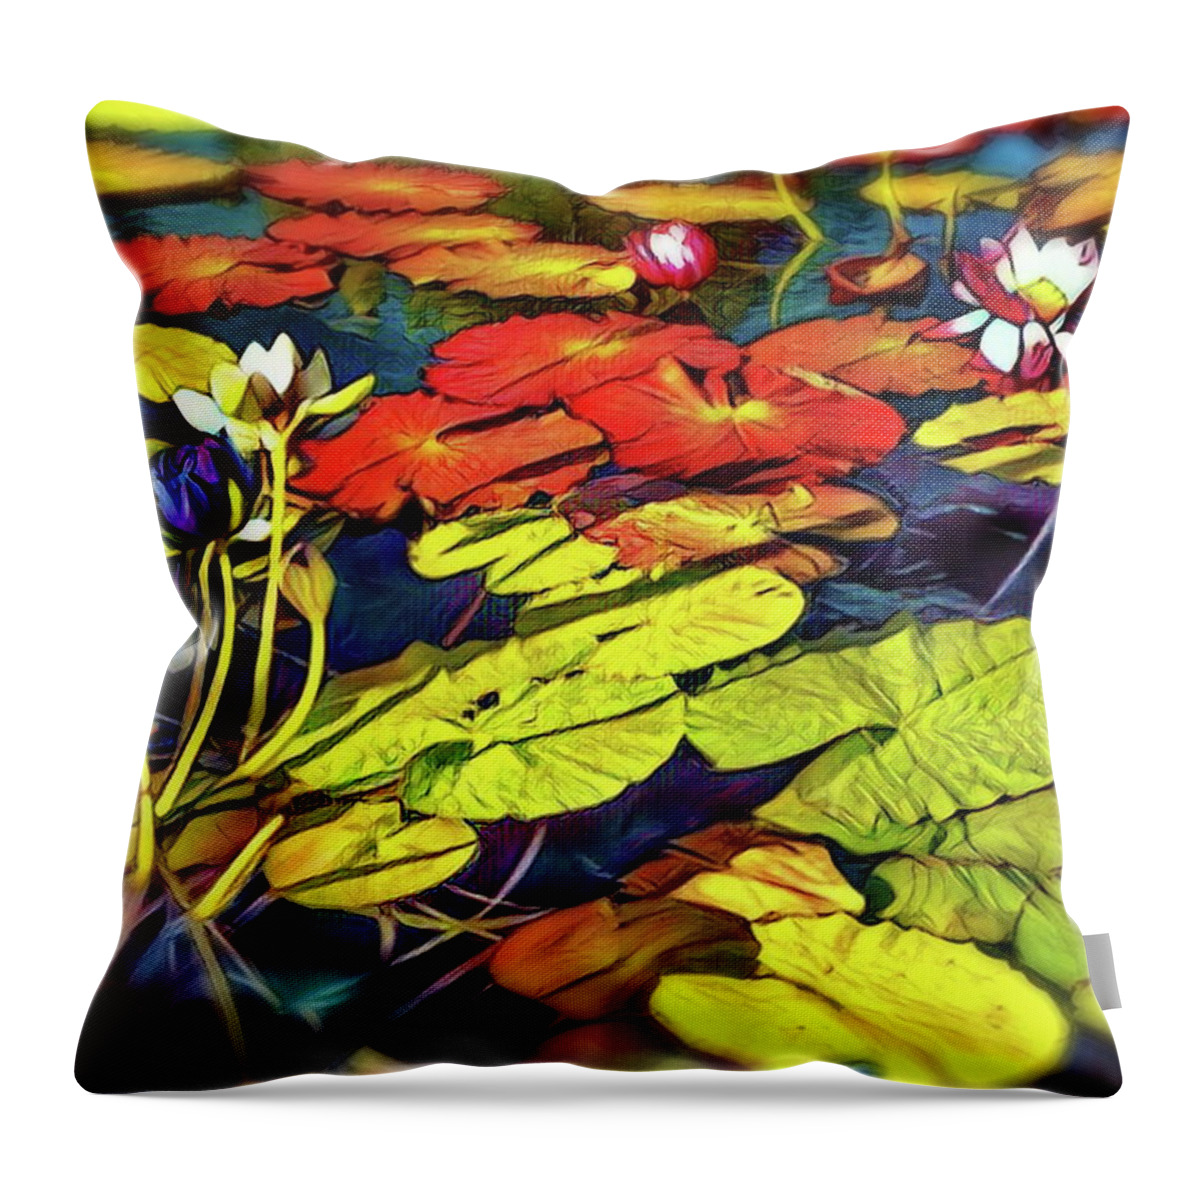 White Throw Pillow featuring the digital art Water Lilly Pond by Russ Harris